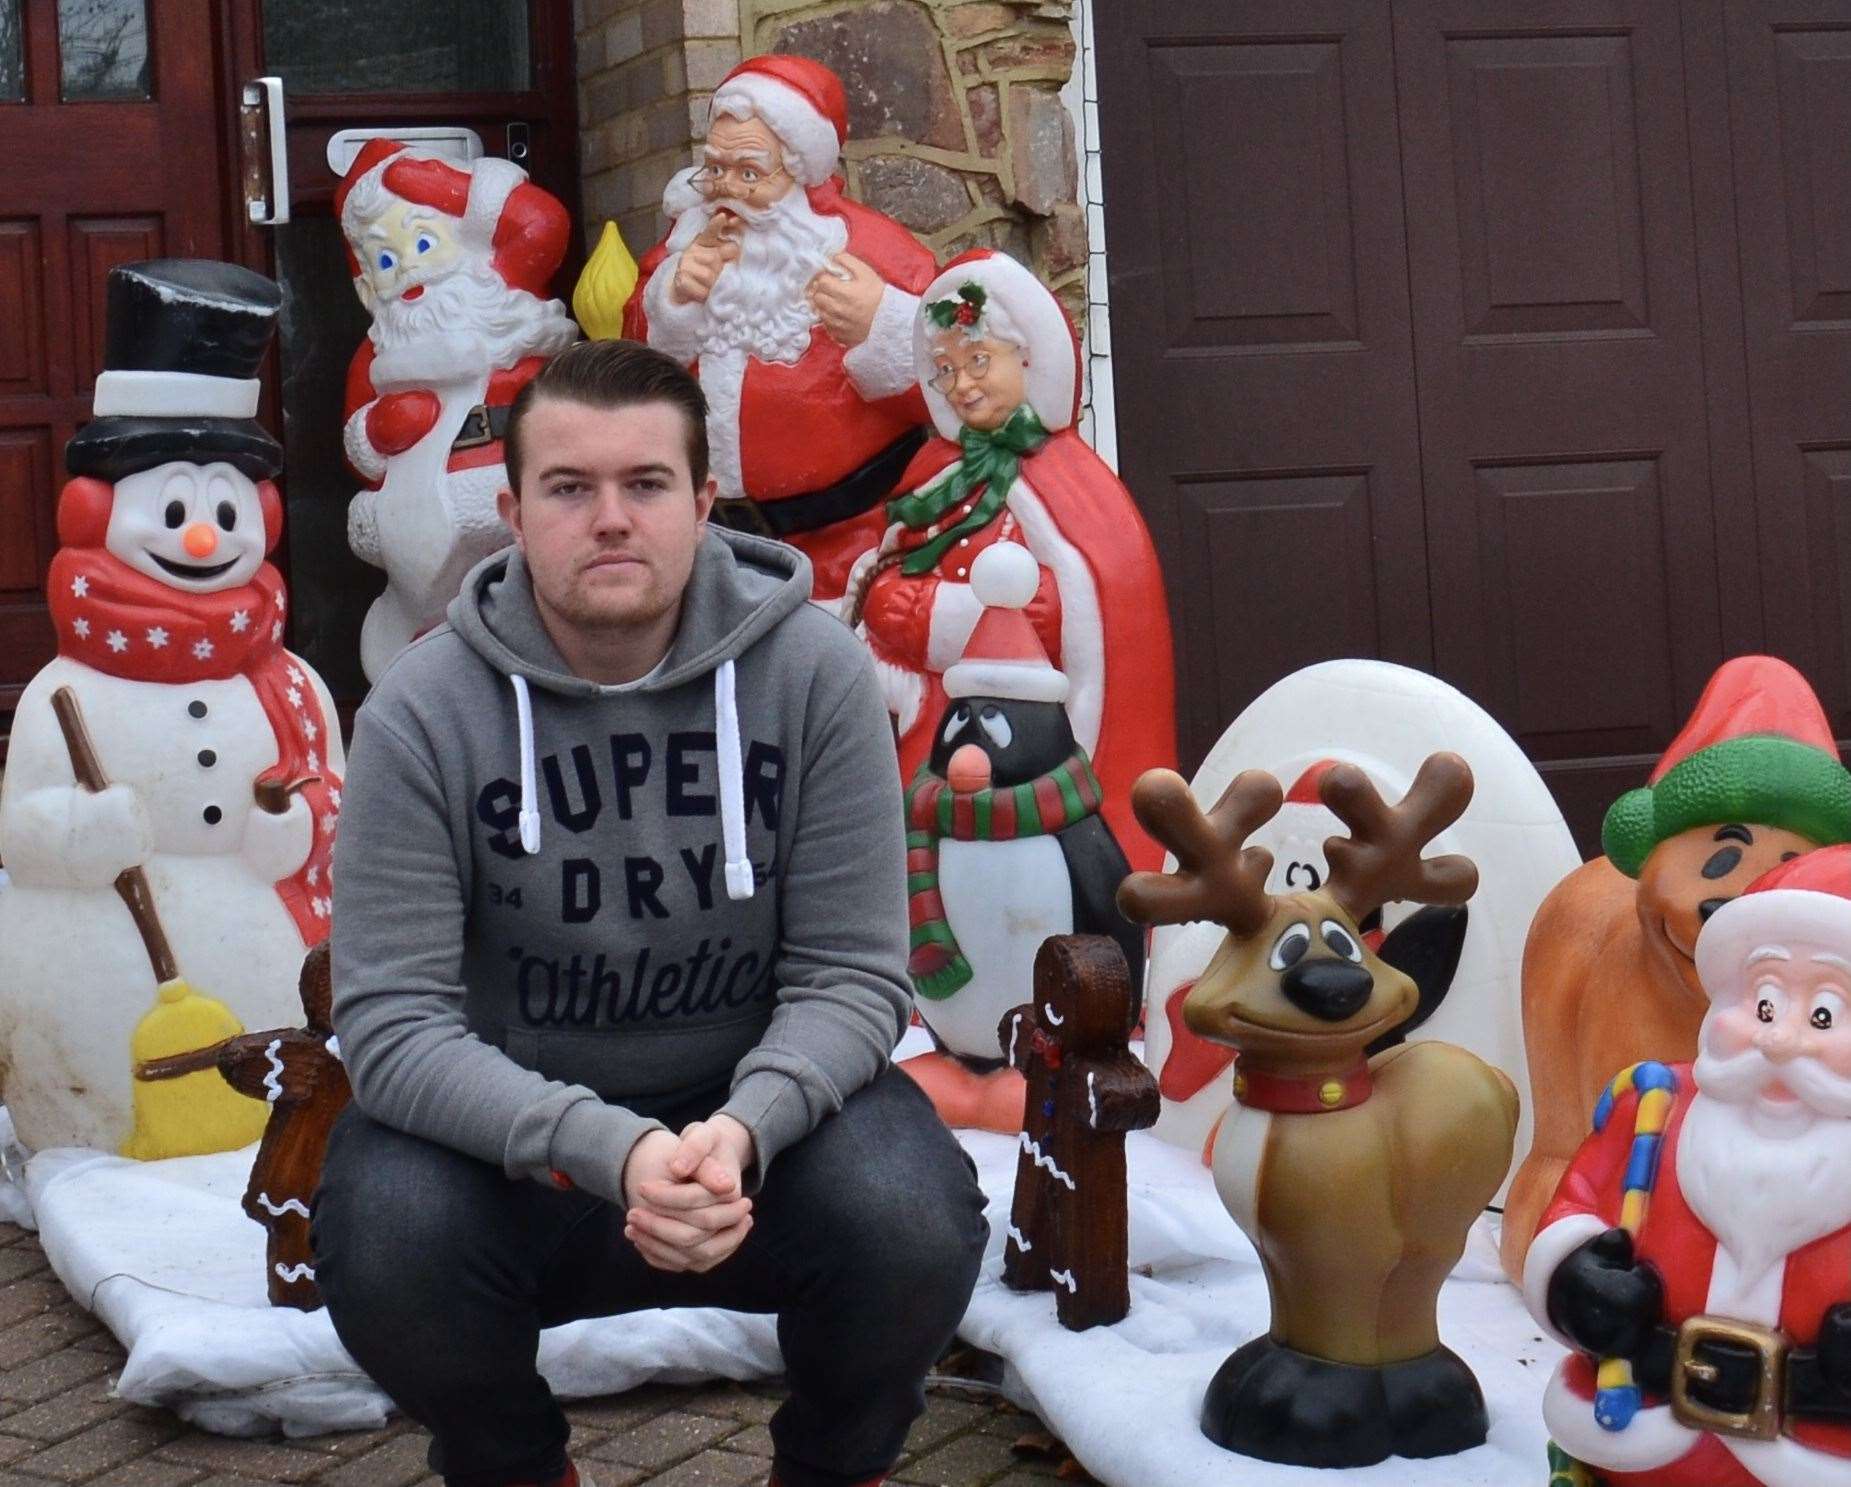 Luke Palmer, 18, from Istead Rise, has set up his Christmas display early. Picture: Luke Palmer